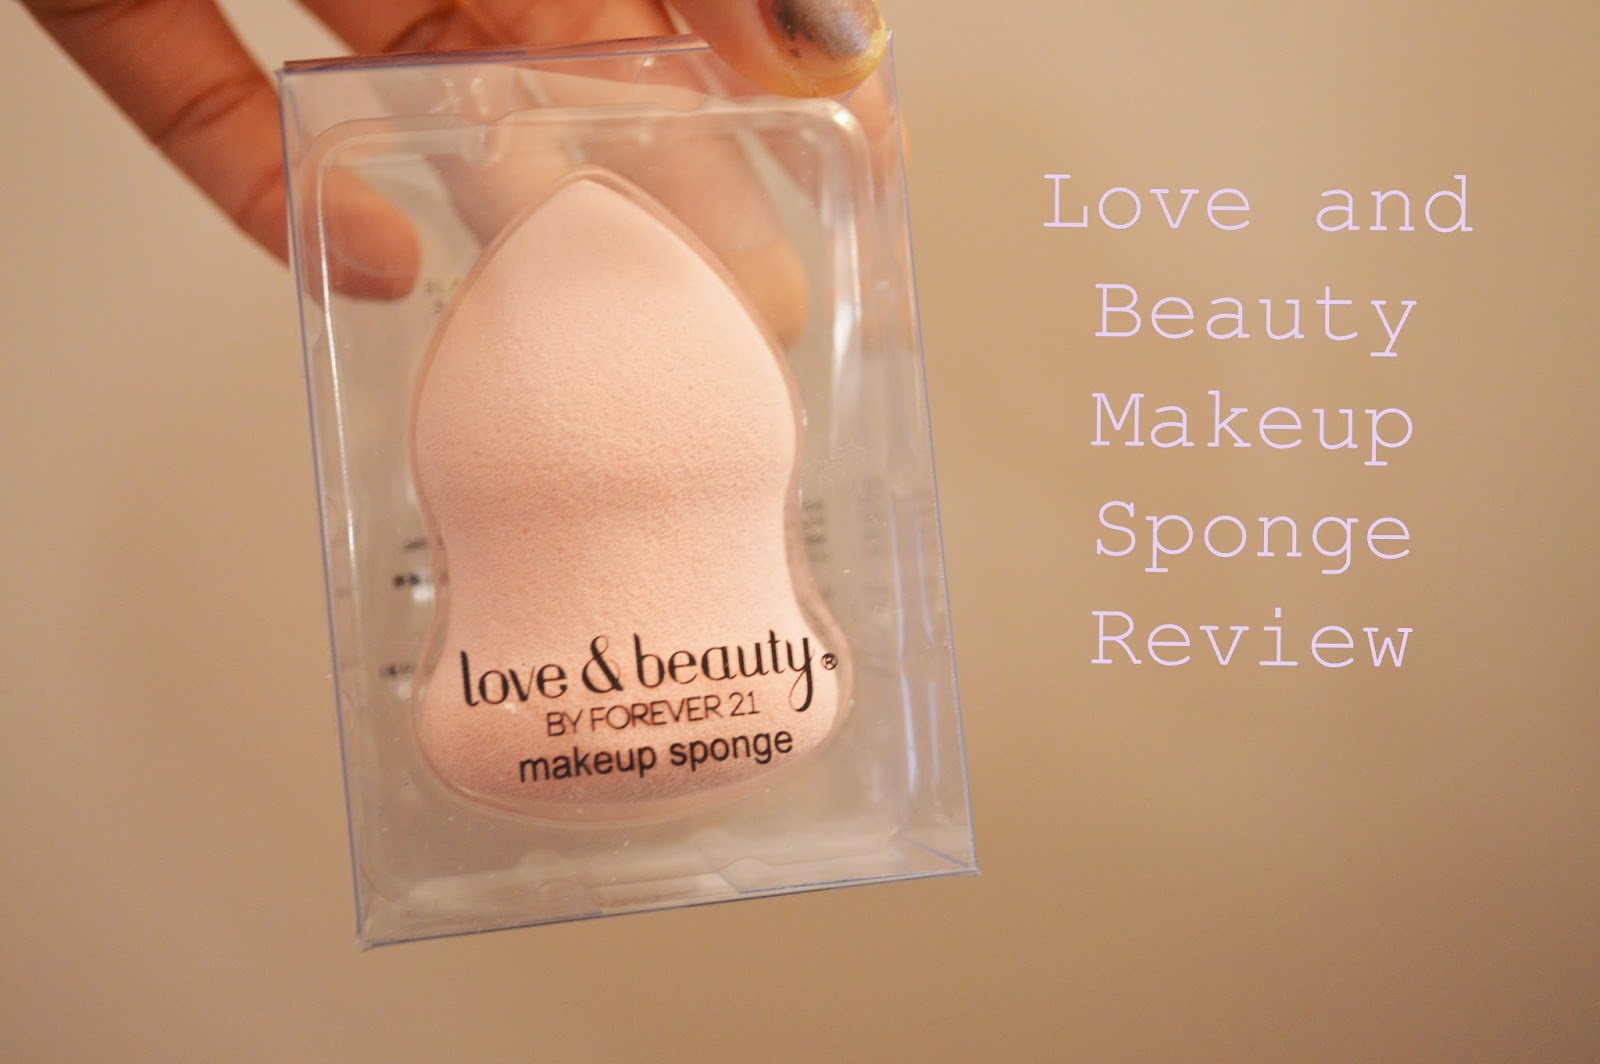 Love and Beauty (Forever 21) Makeup Sponge